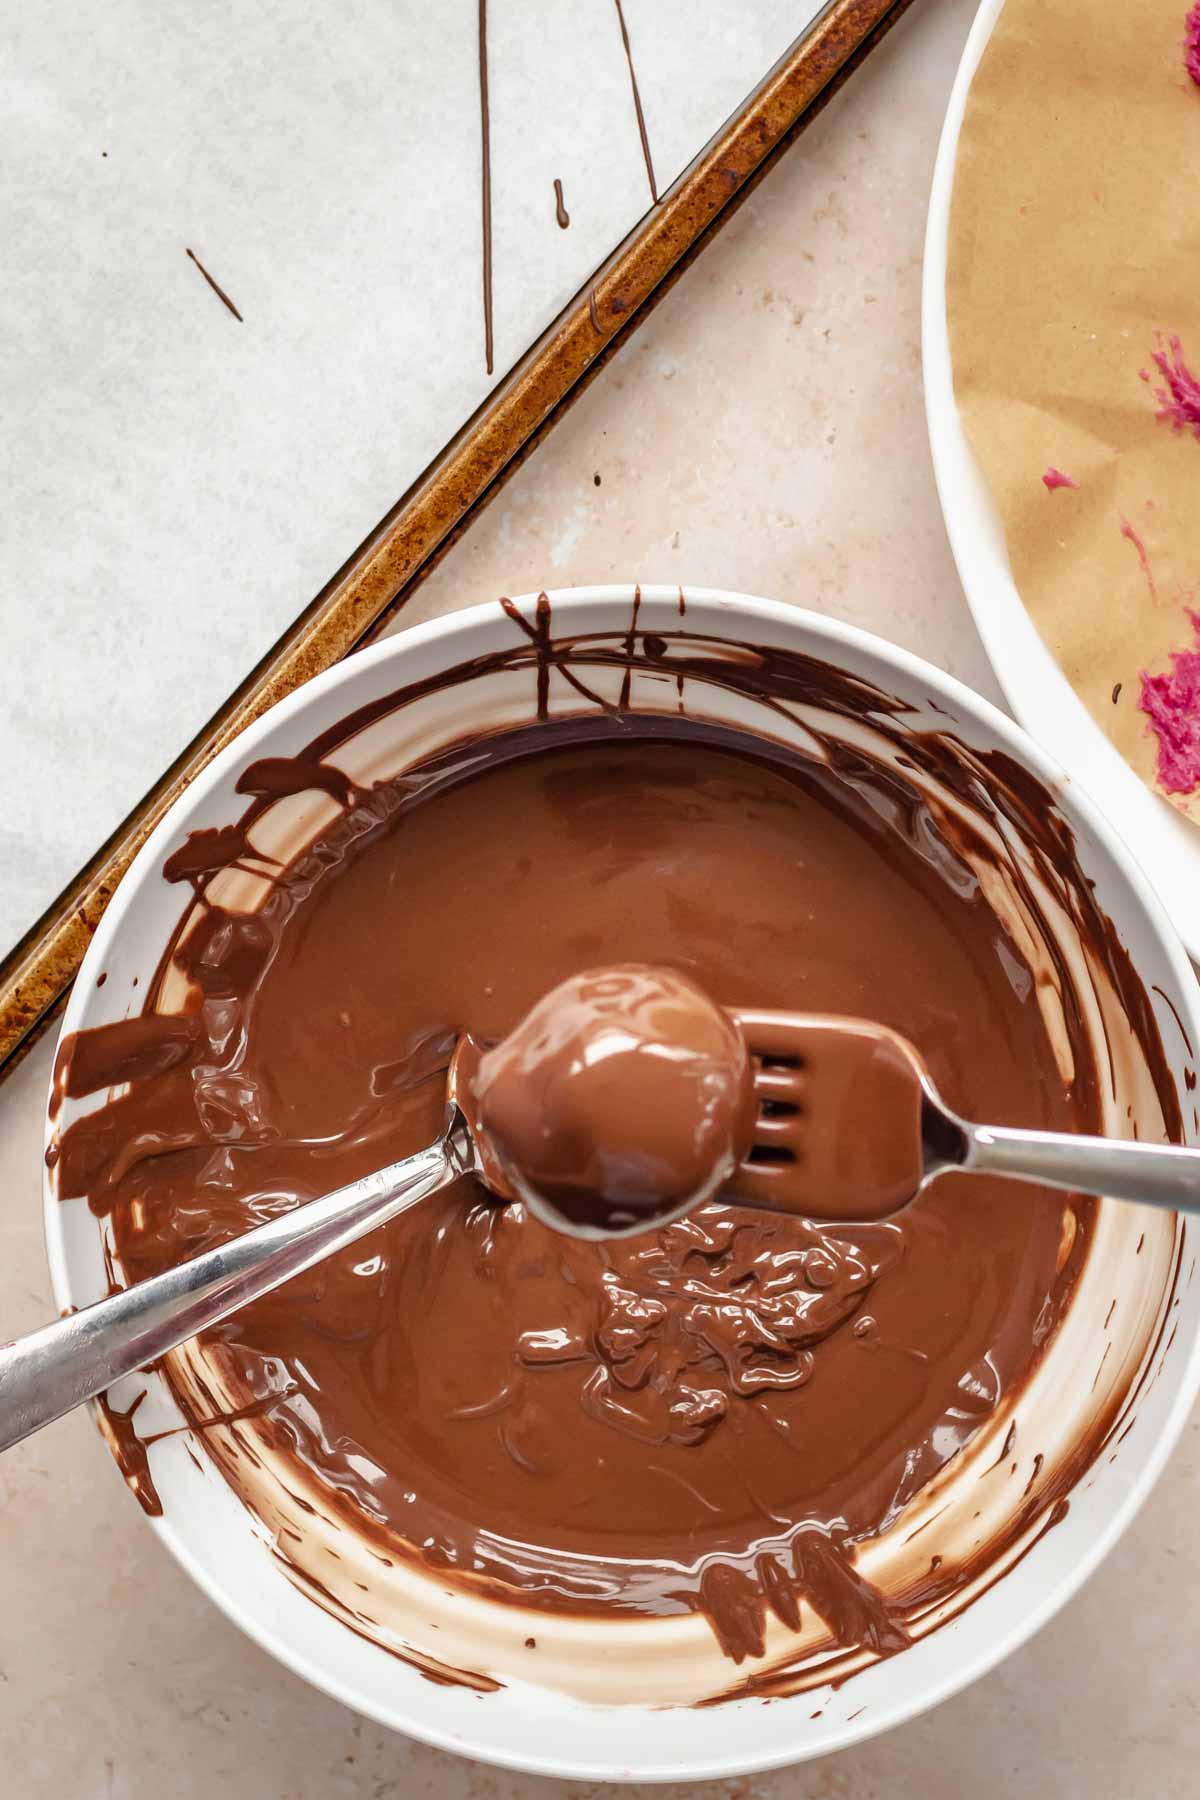 Two forks hold up a chocolate covered truffle.